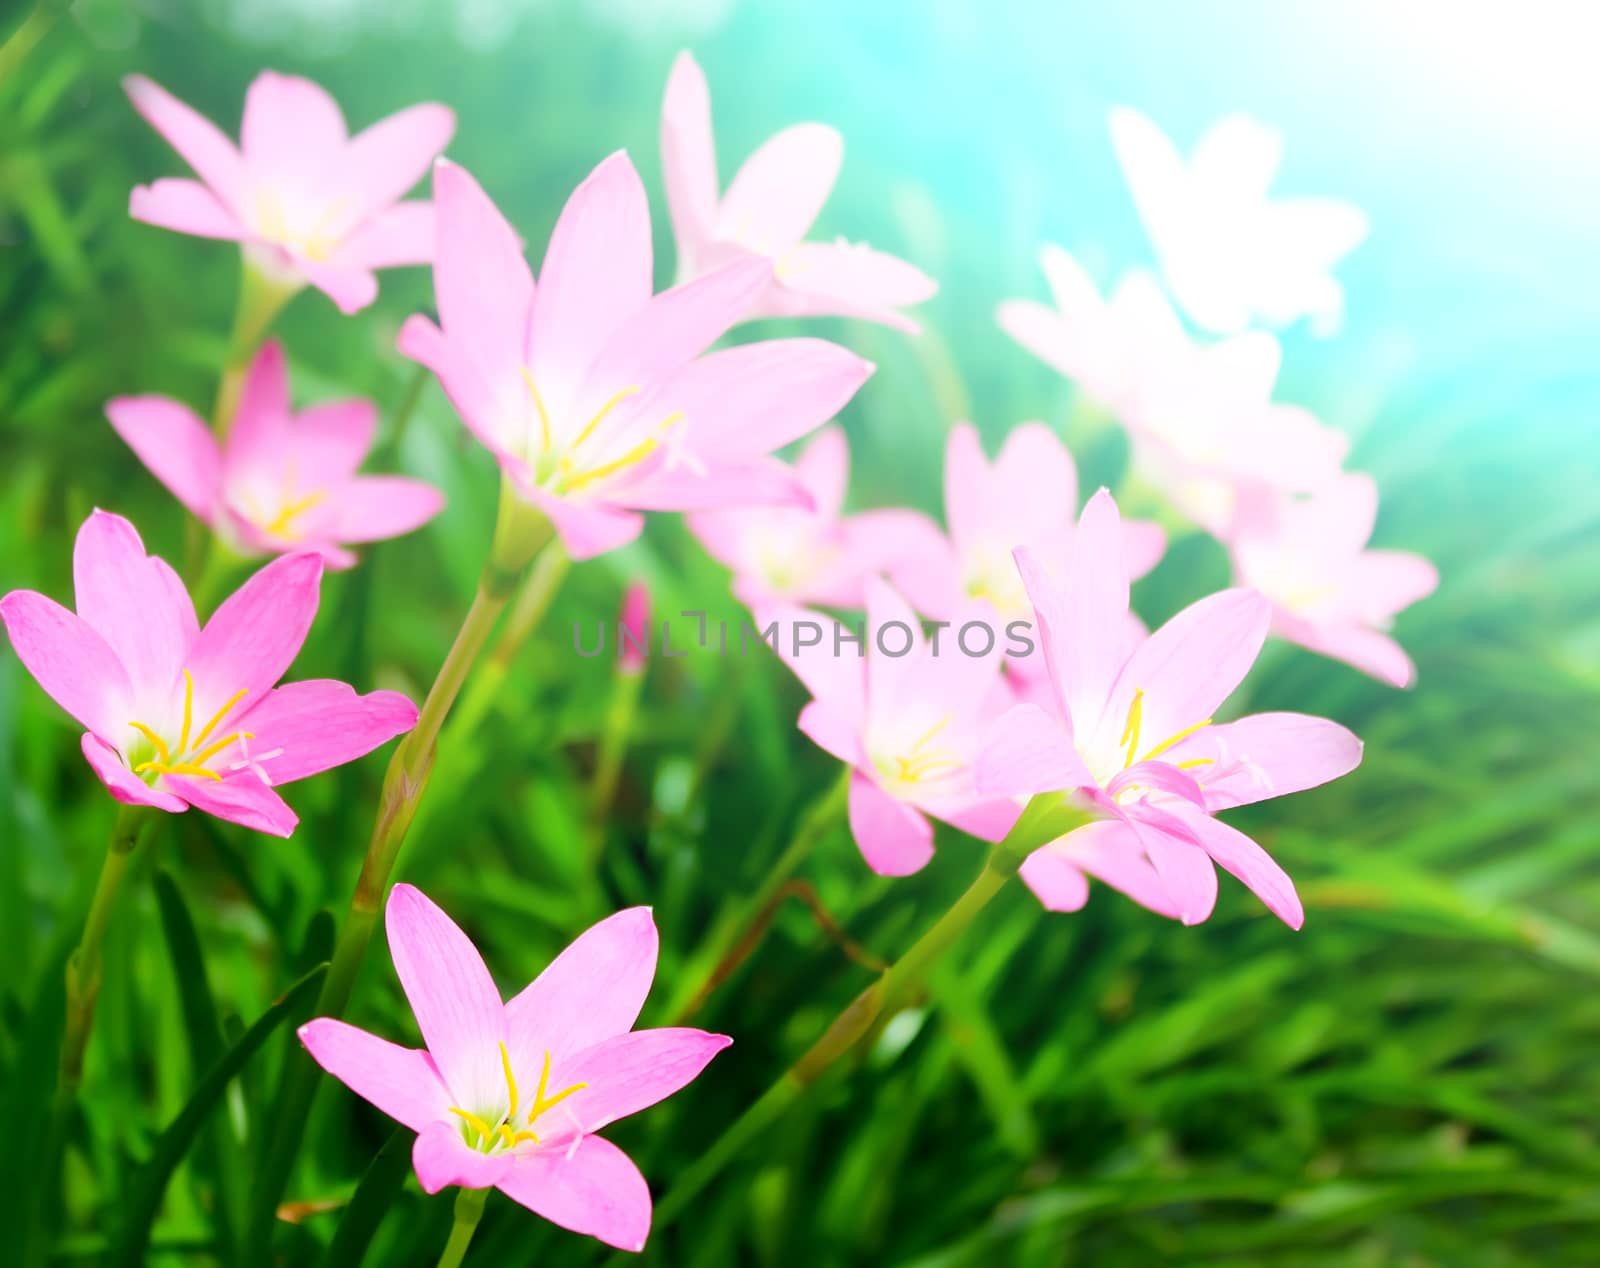 beautiful pink flowers in the garden by dinhngochung